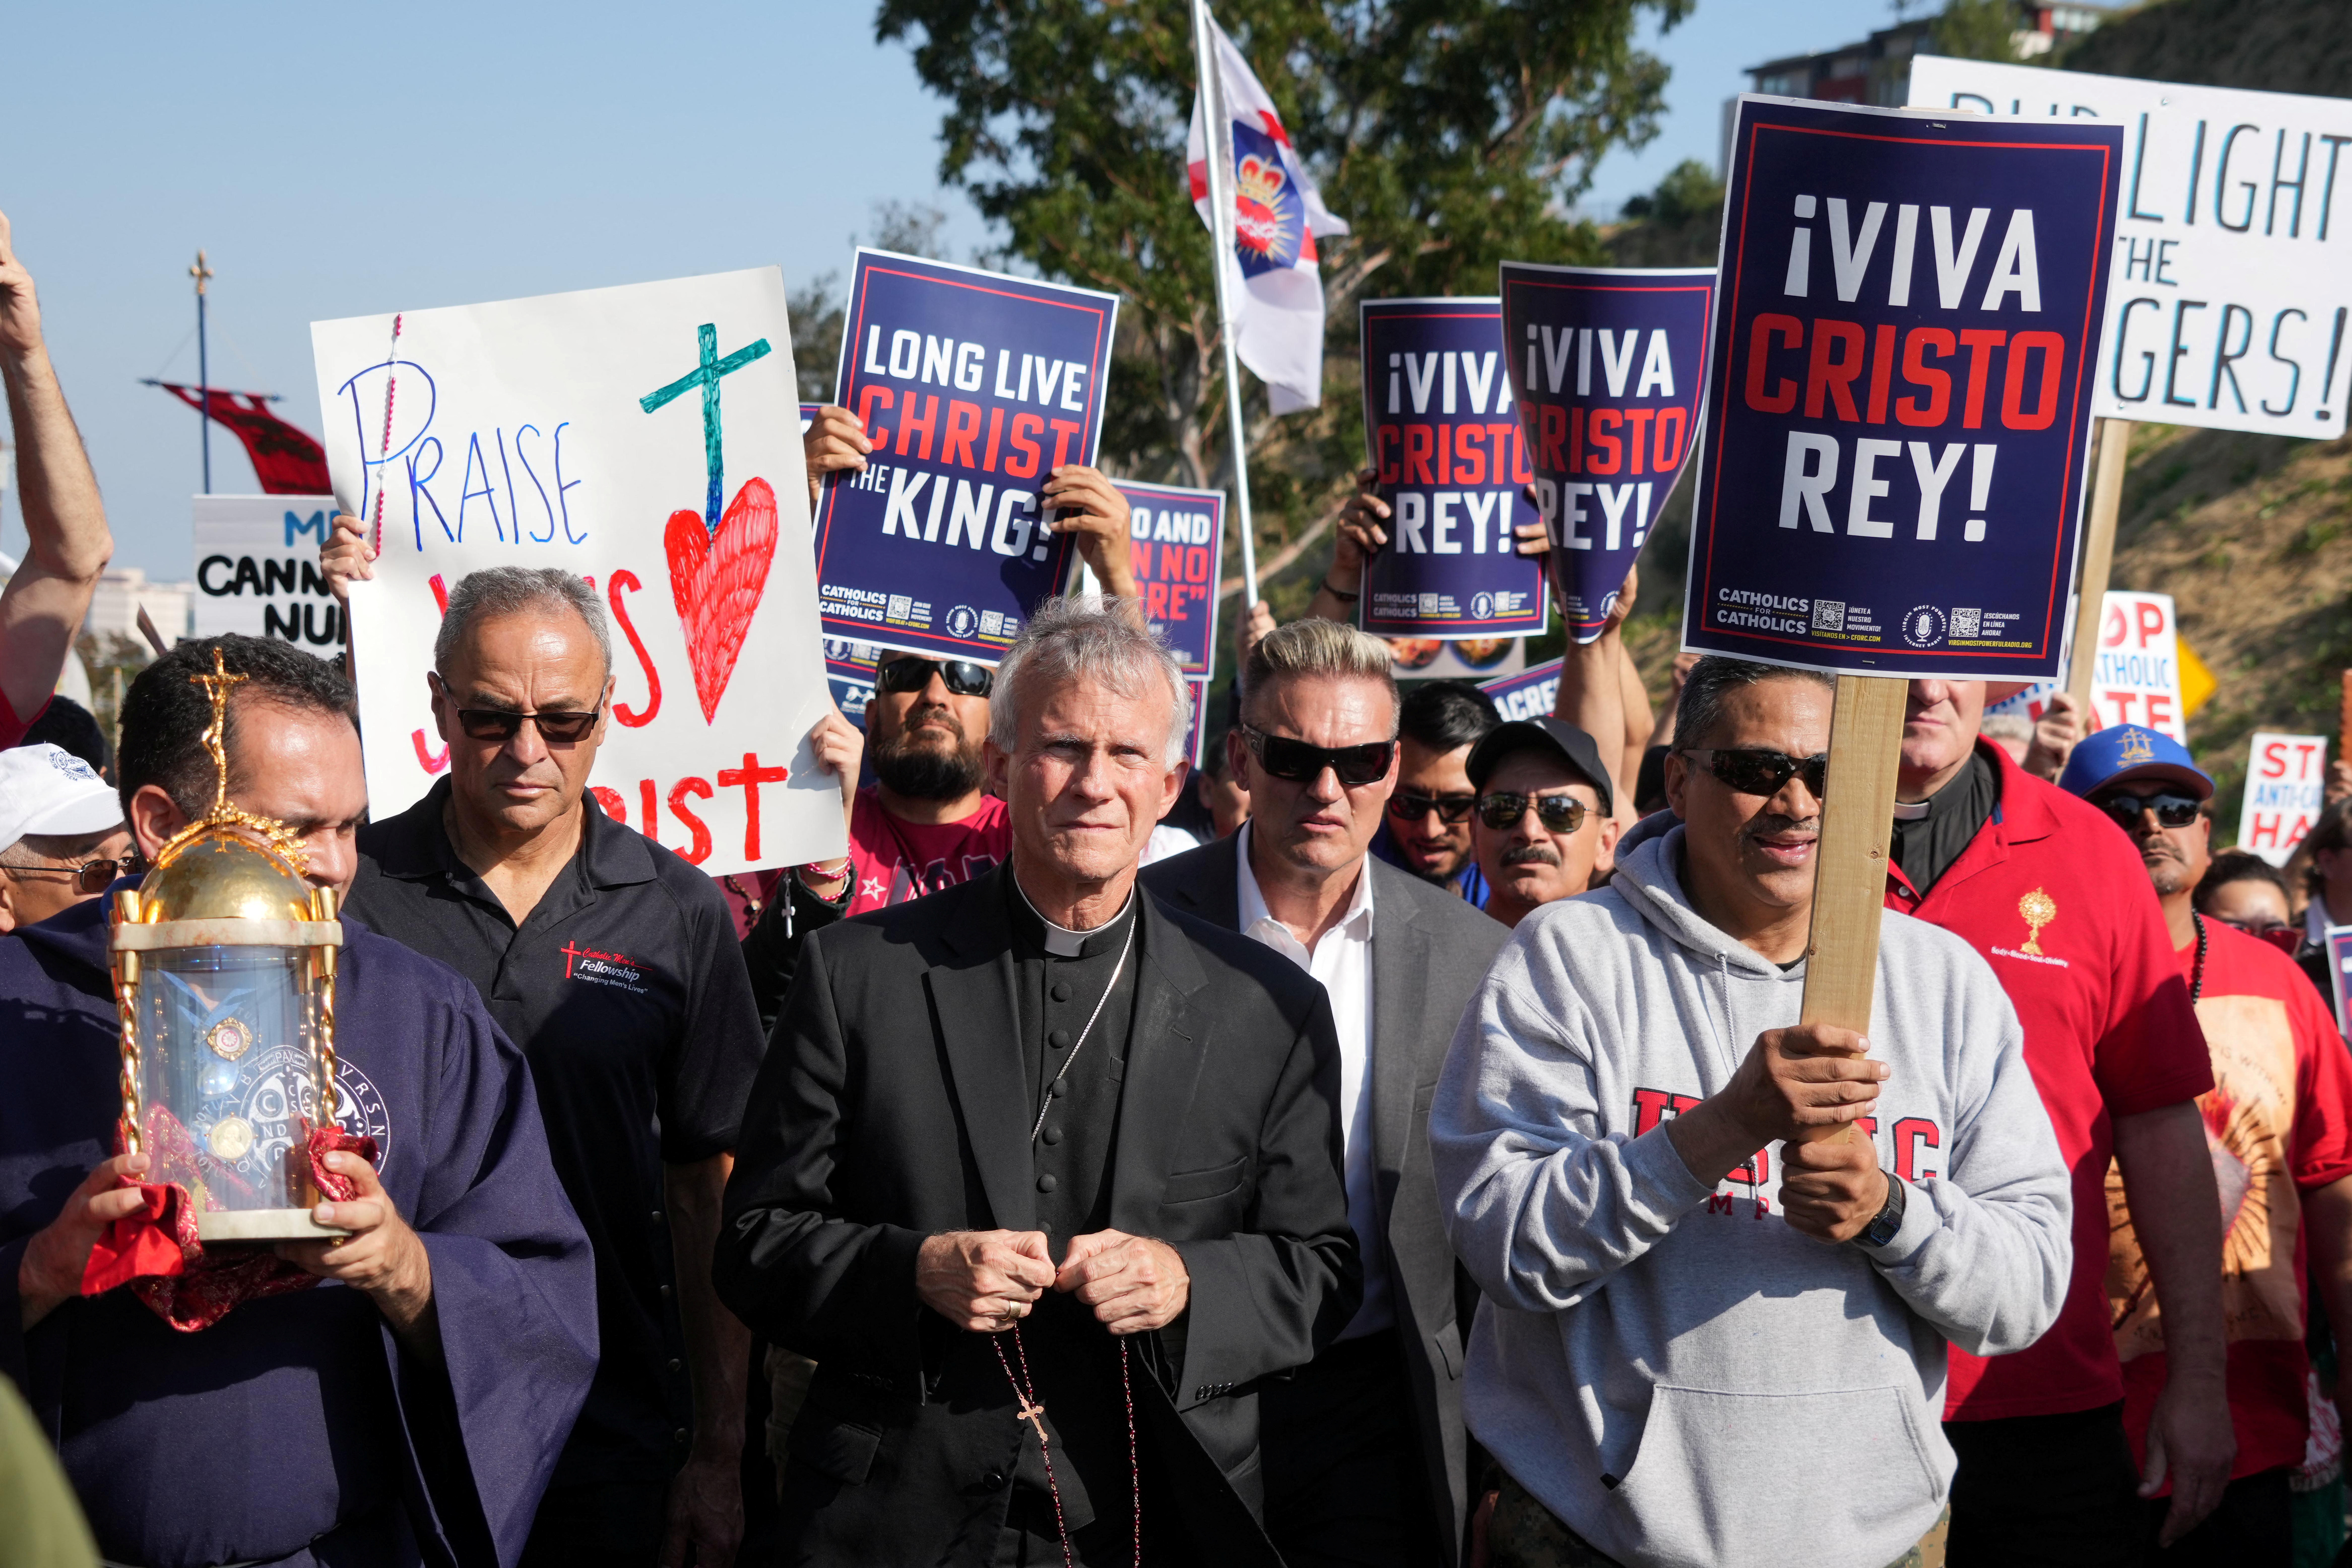 Catholic bishop Joseph Strickland protests the Los Angeles Dodgers honoring the pro-LGBTQ+ group Sisters of Perpetual Indulgence